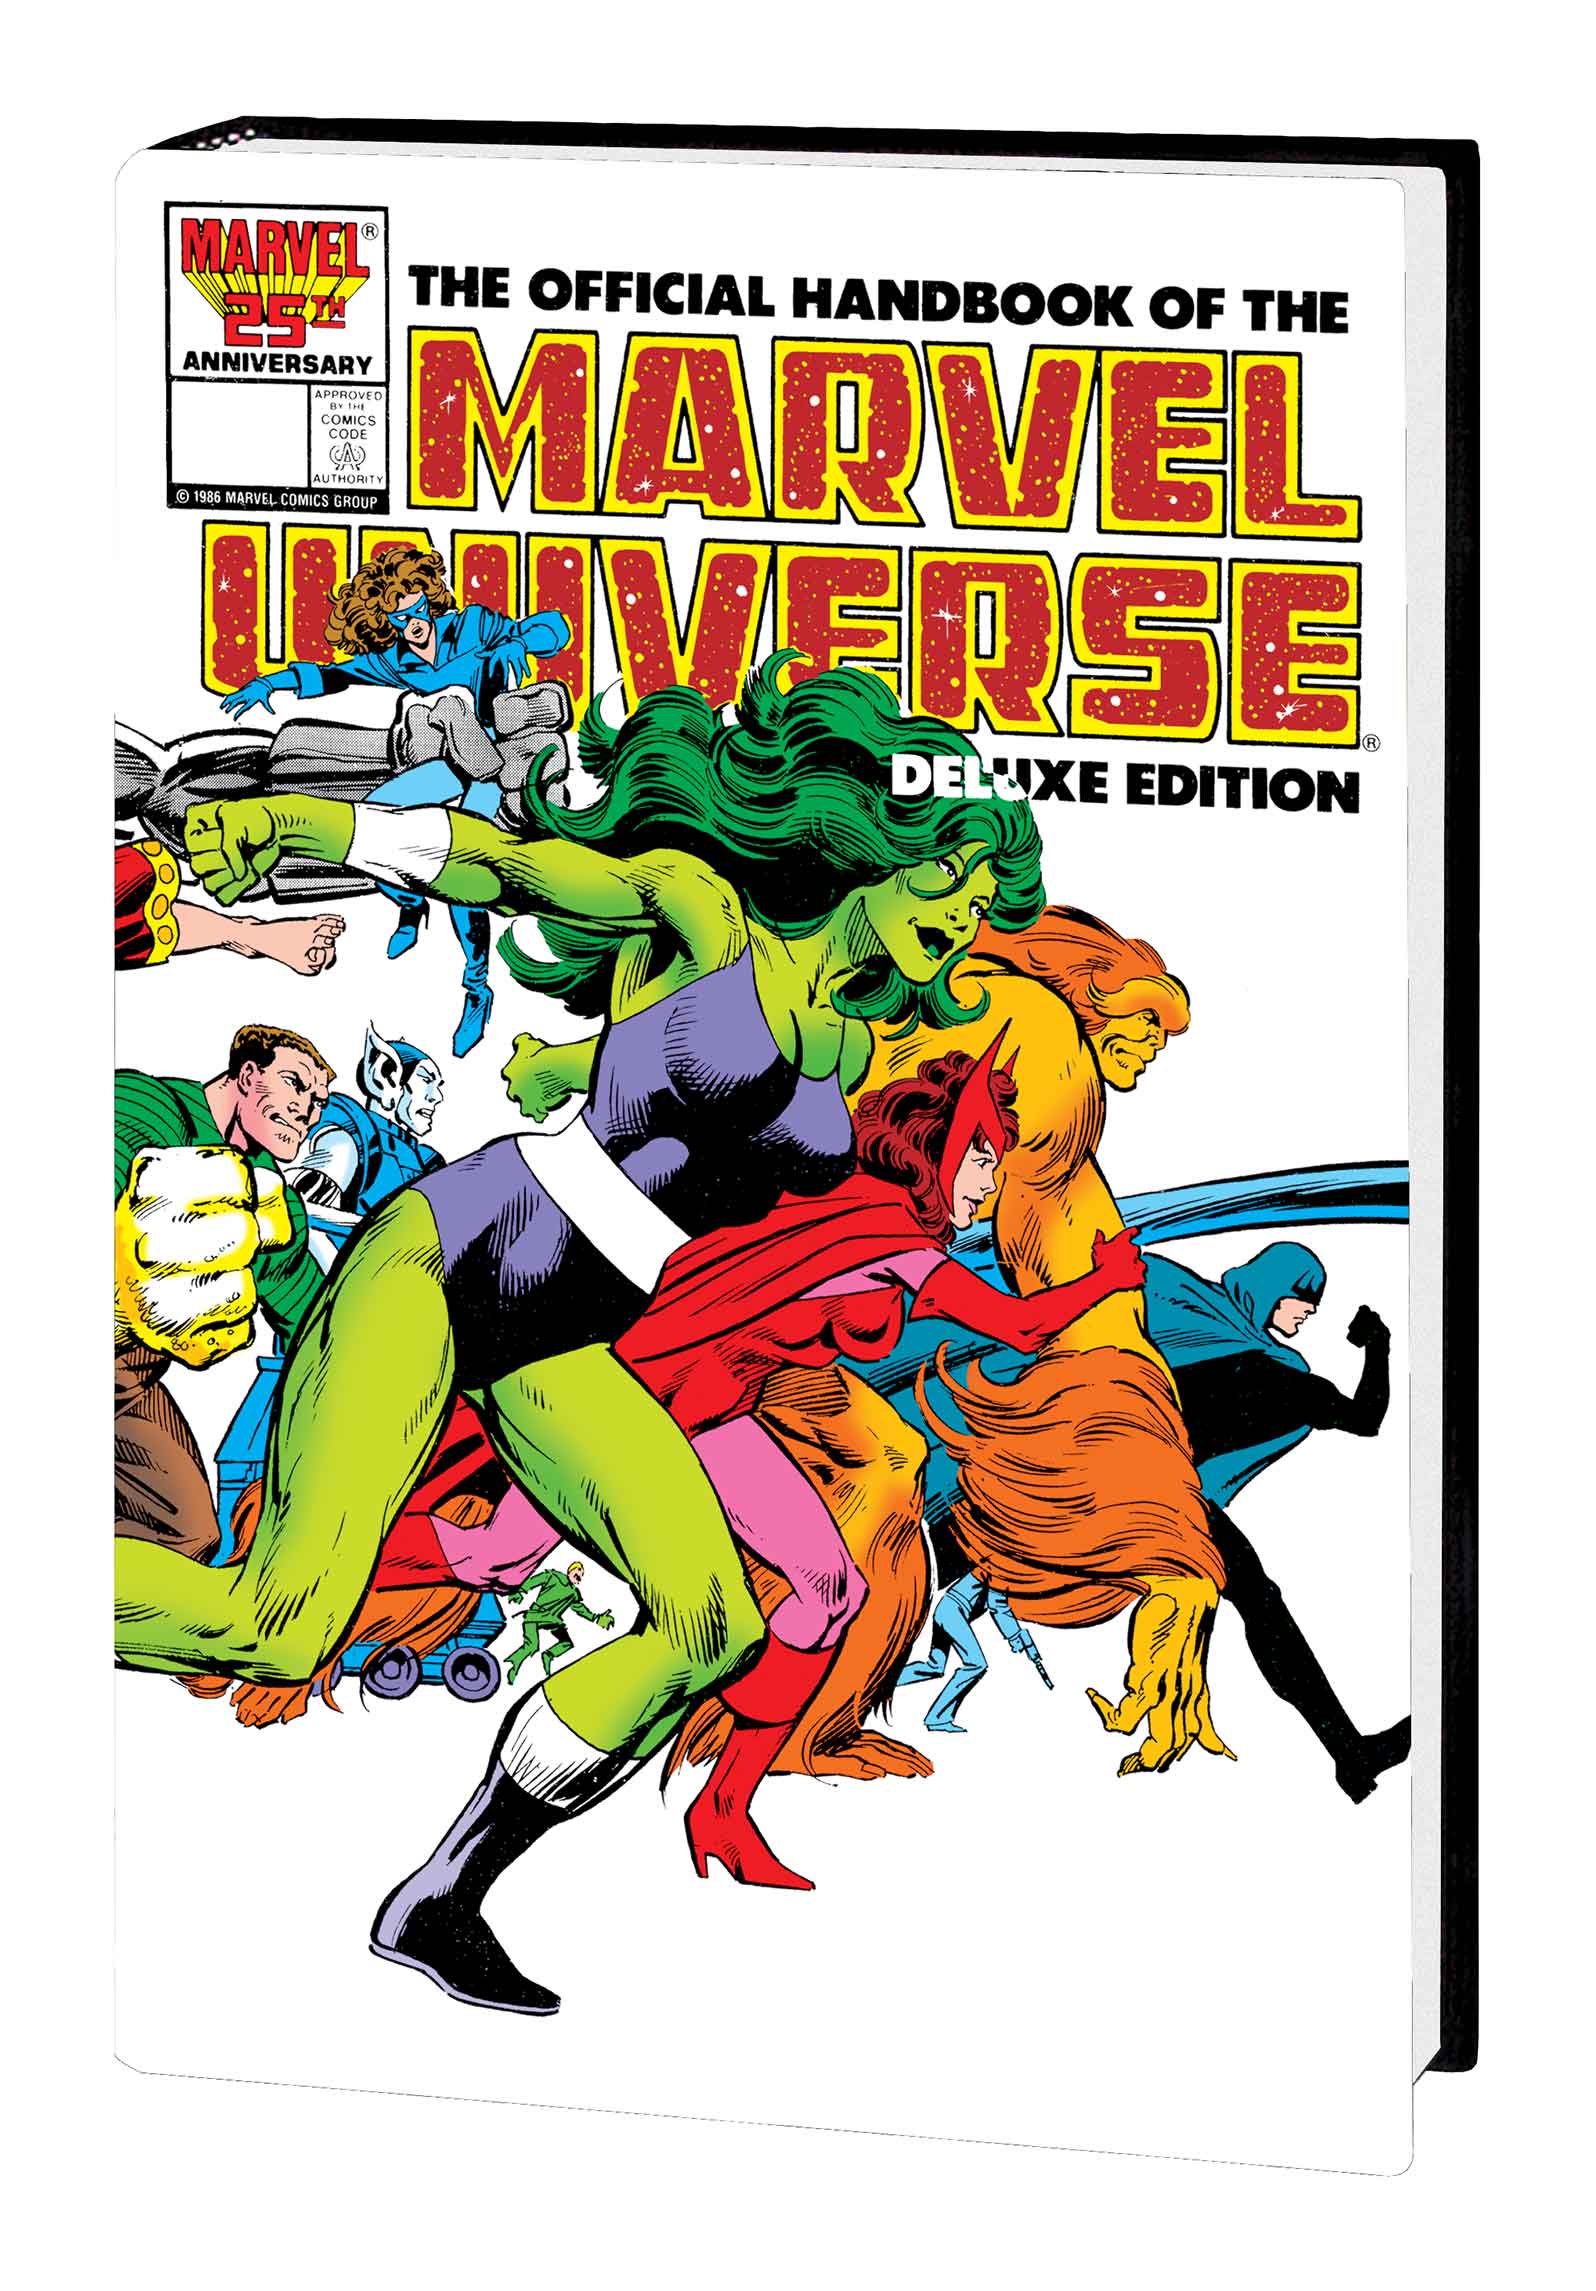 OFFICIAL HANDBOOK OF THE MARVEL UNIVERSE DELUXE EDITION to Get Omnibus Collection 13th